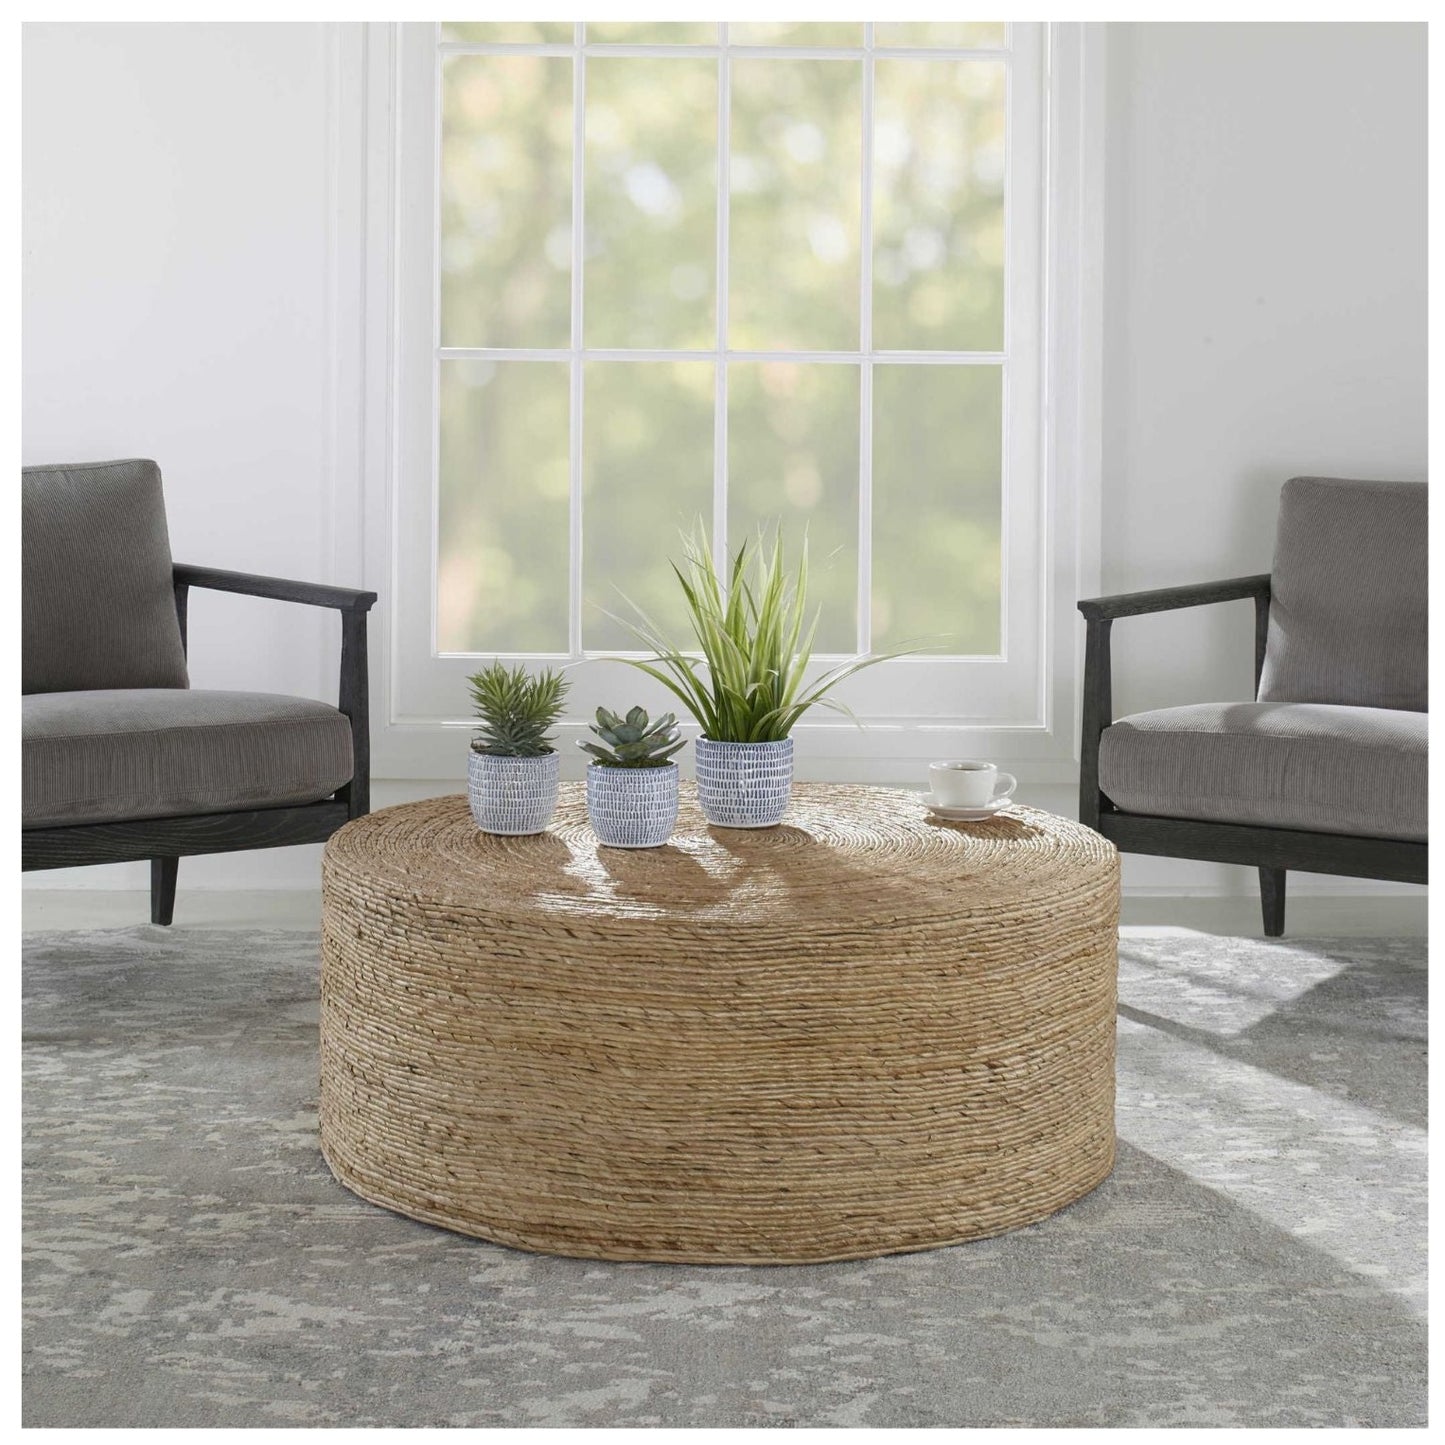 Room setting of this round coffee table with two chairs